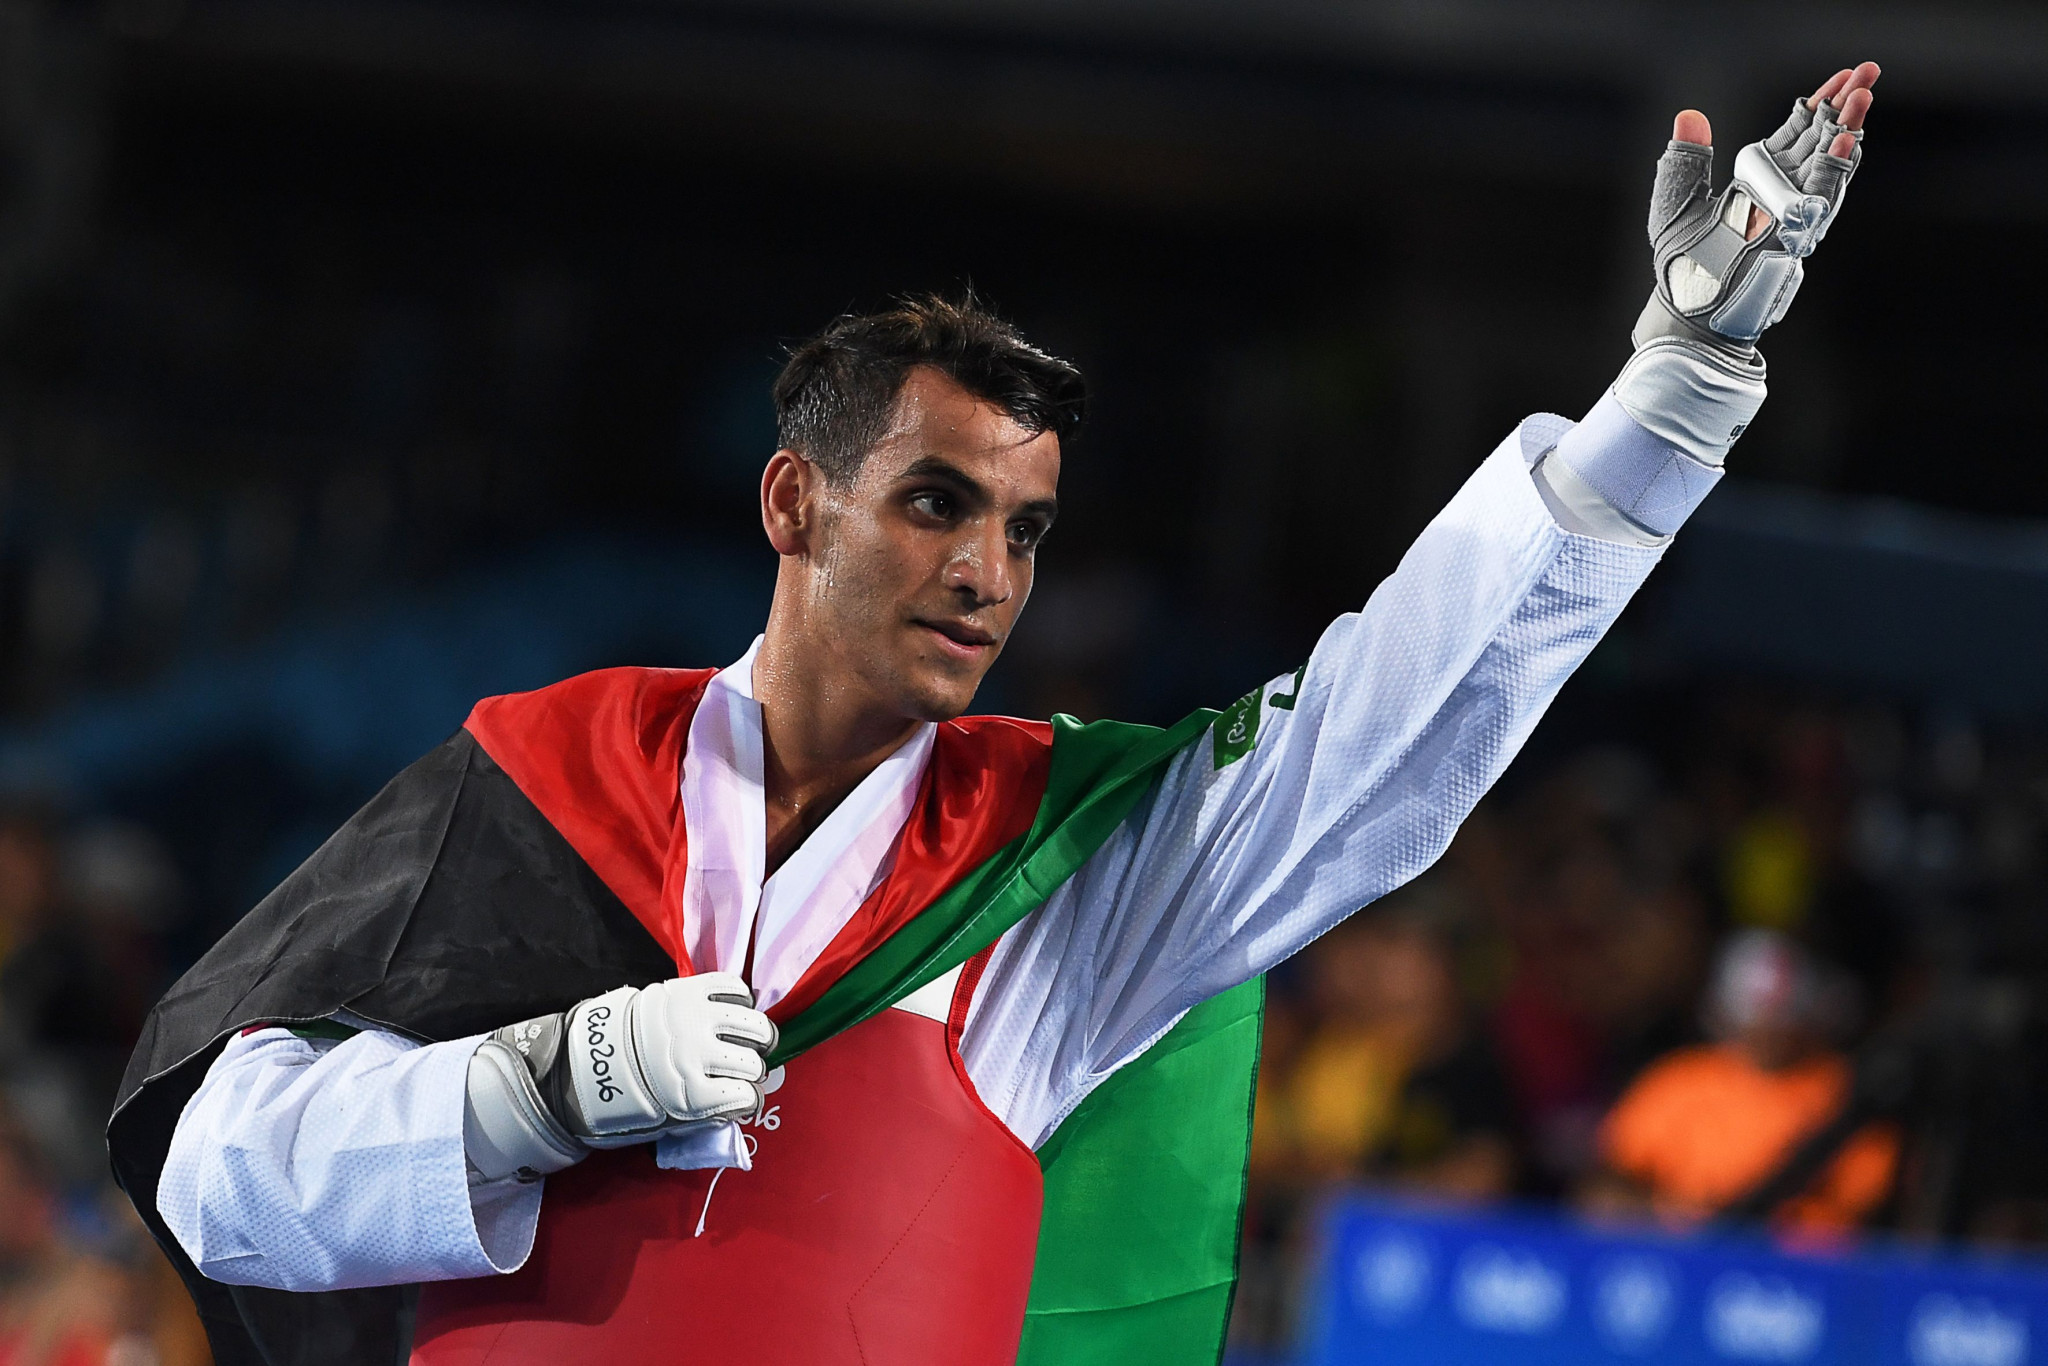 Ahmad Abu Ghaush became Jordan's first Olympic champion at Rio 2016 ©Getty Images